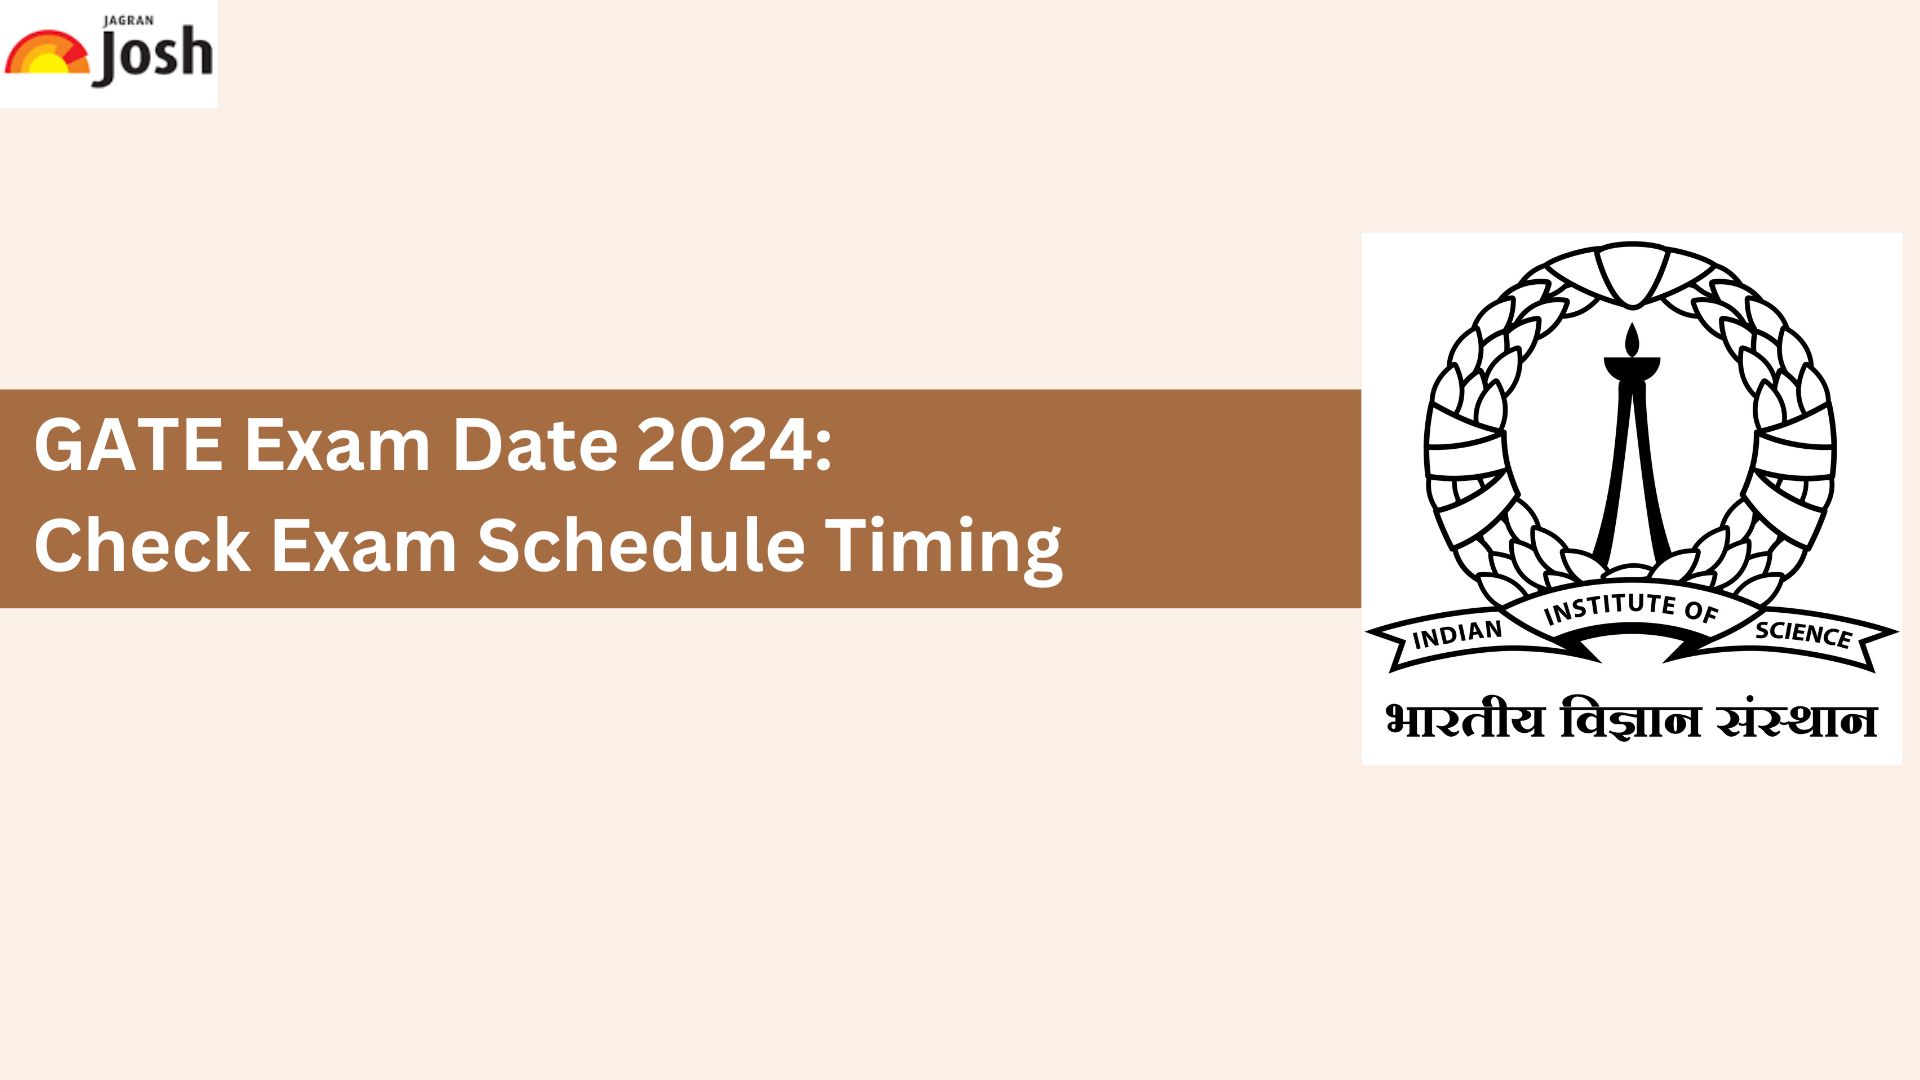 GATE Exam Date 2024 Paper Wise Exam Schedule, Time